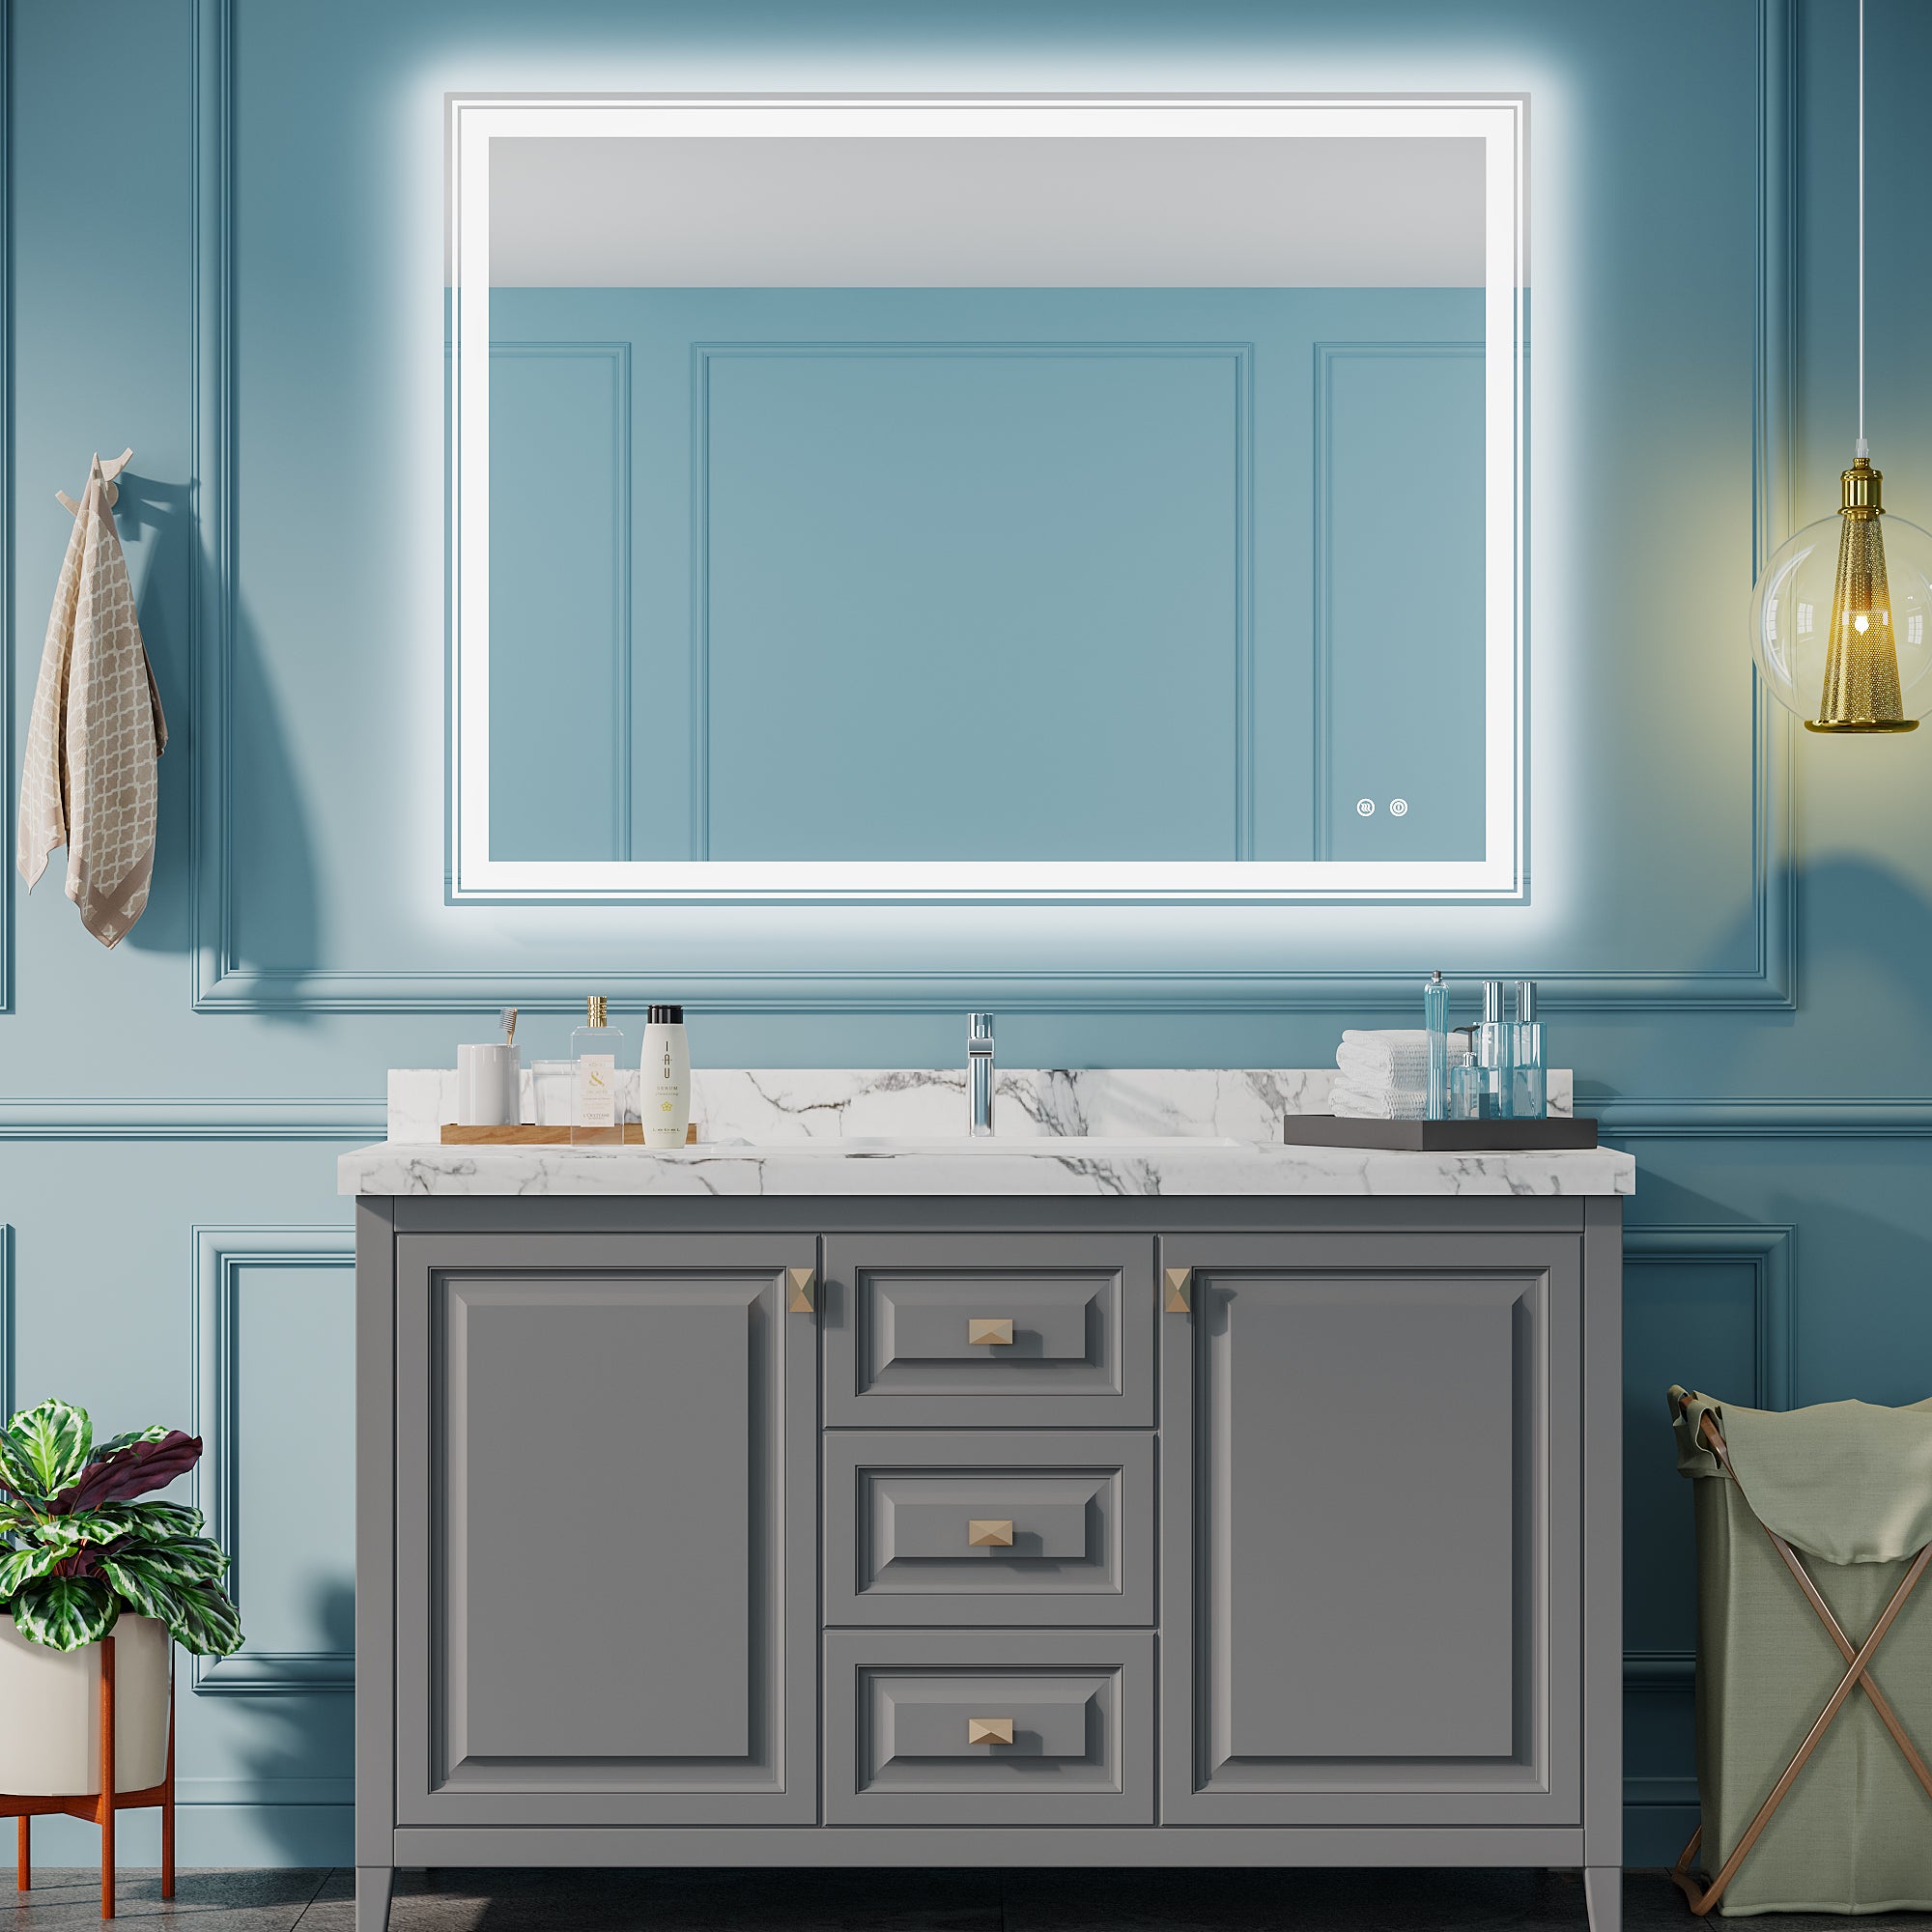 48"×36" LED Bathroom Vanity Mirror with Anti-fog and Adjustable Brightness Front and Back Light